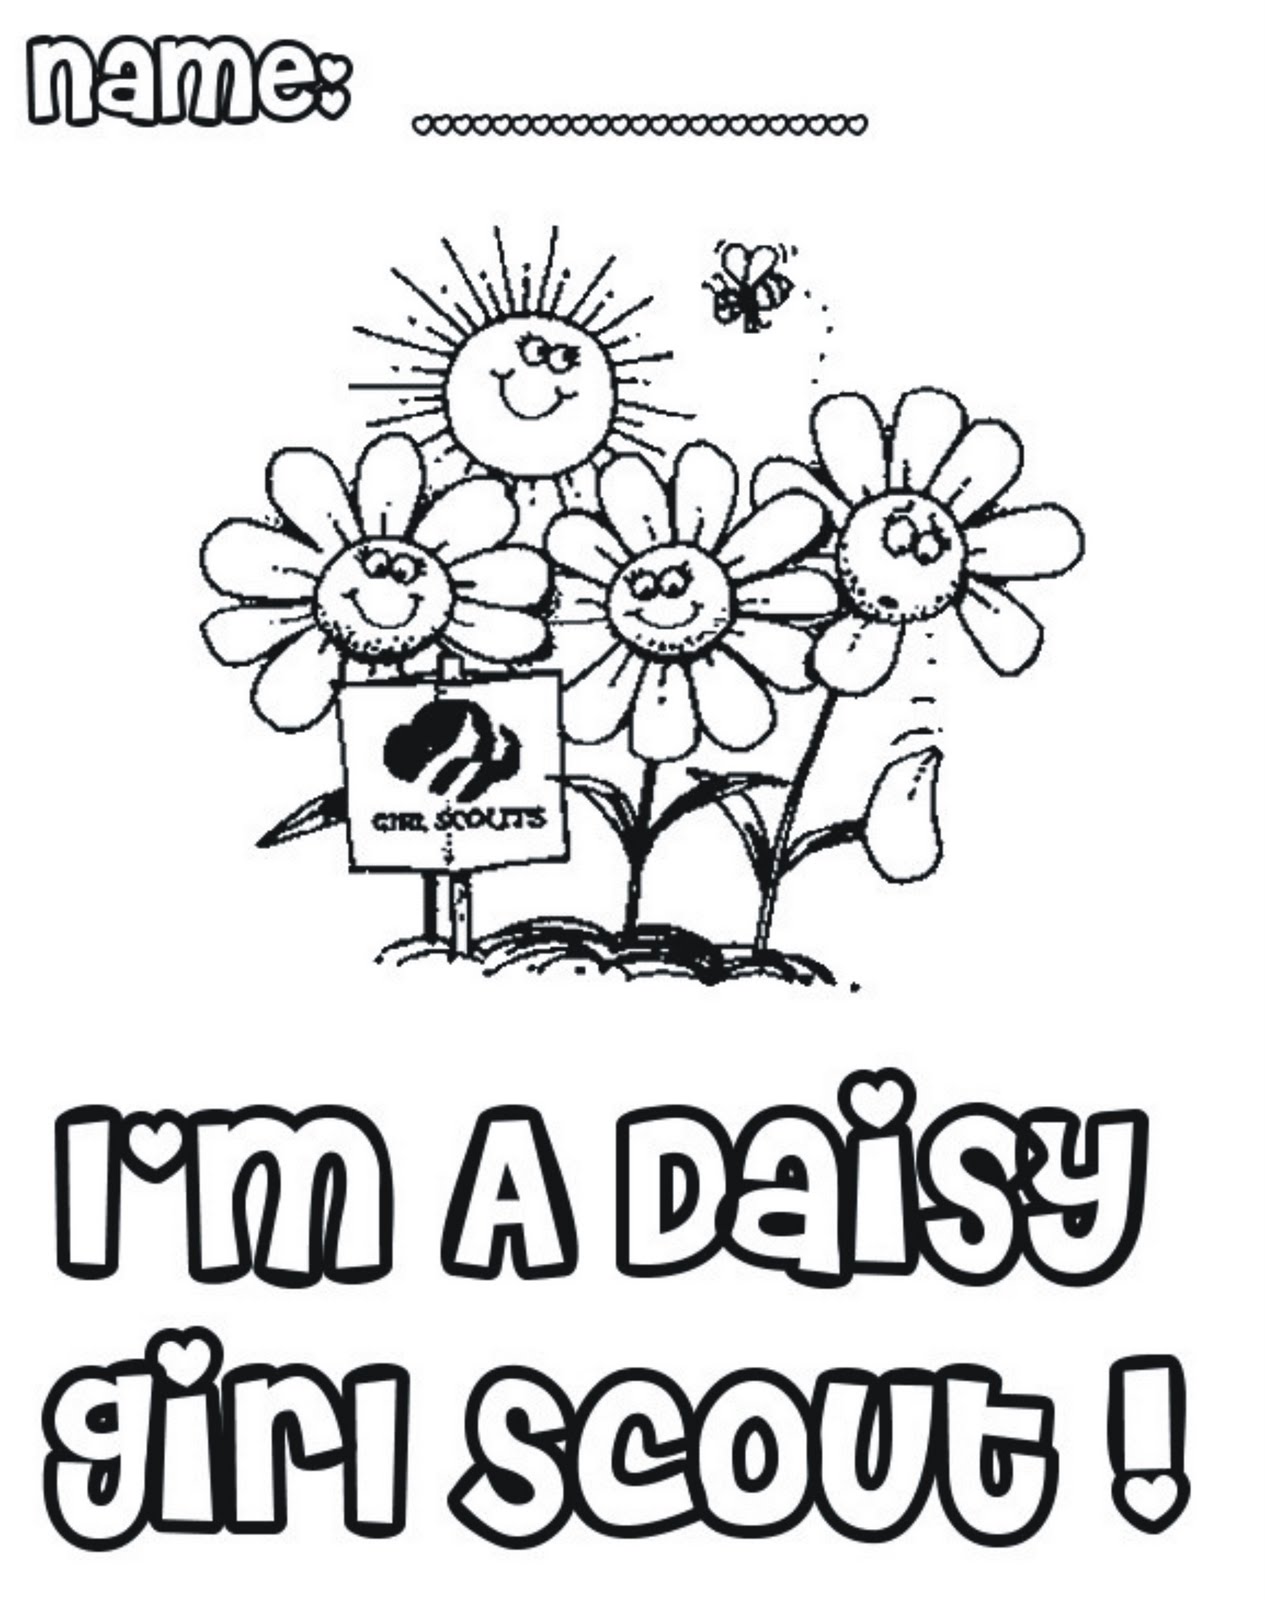 daisy girl scout journey coloring pages - photo #11